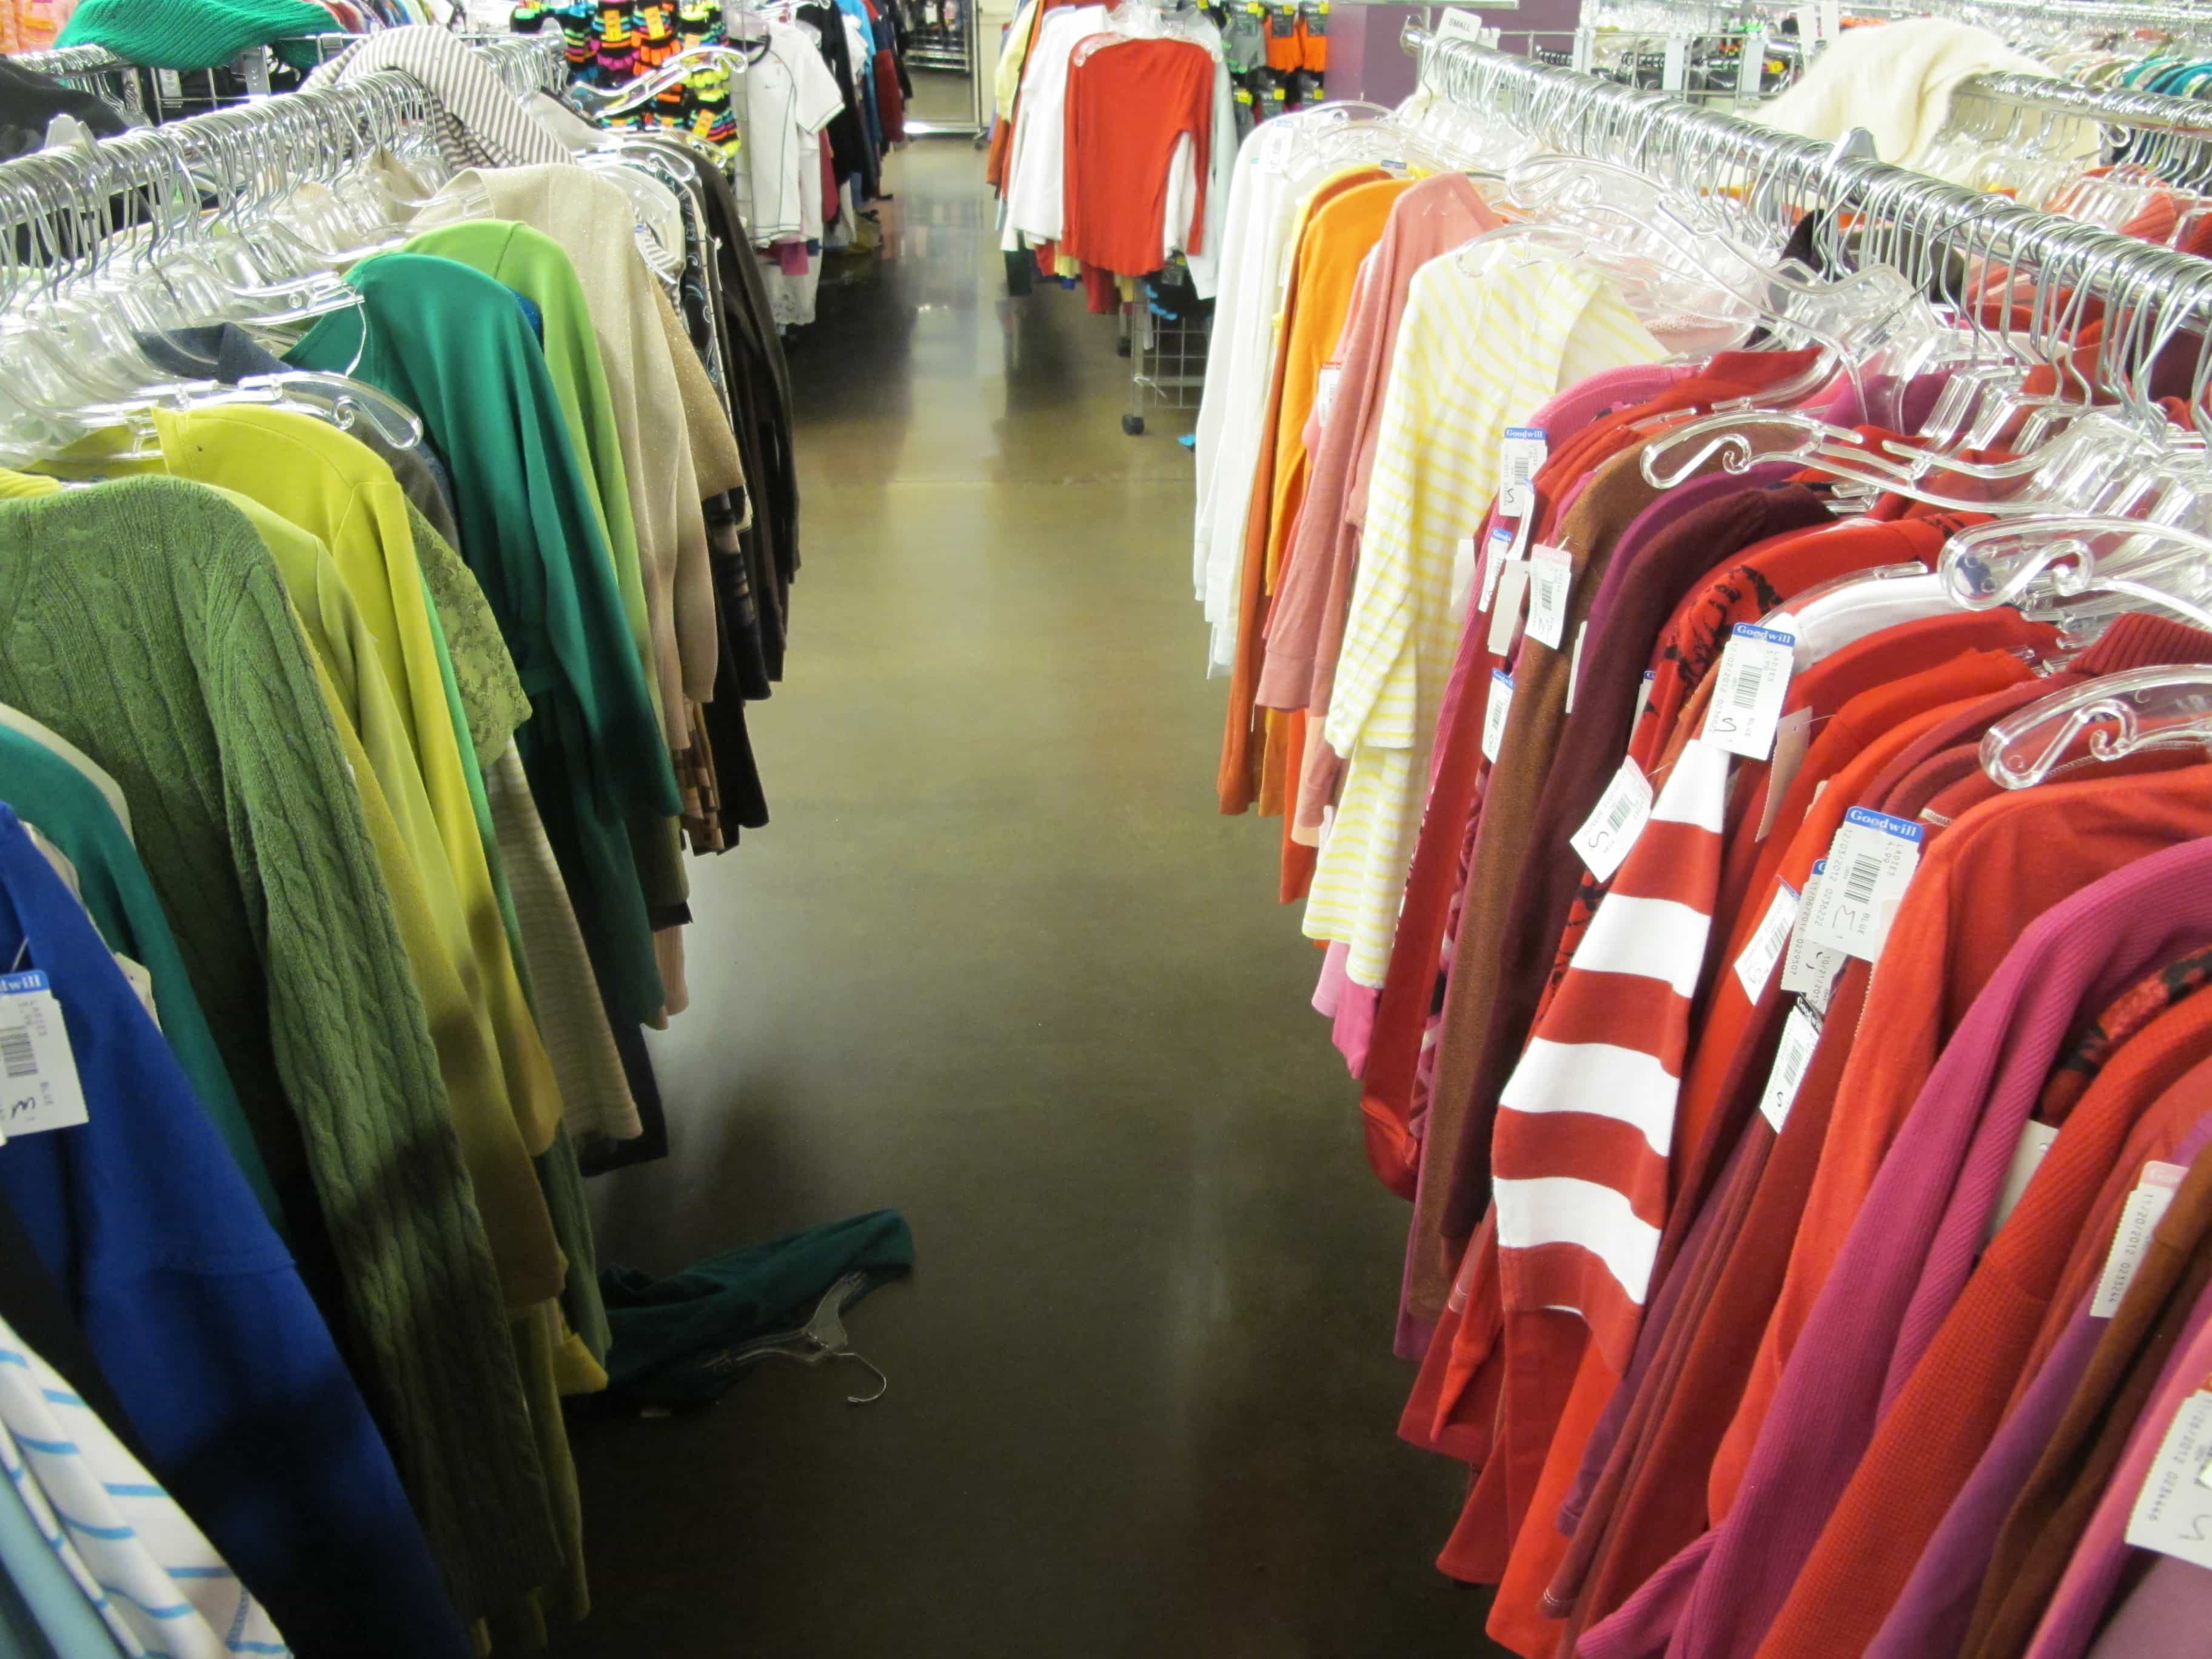 The Best Thrift Store in Seattle: GO INSIDE the Goodwill on South Lane - Thrift Diving Blog